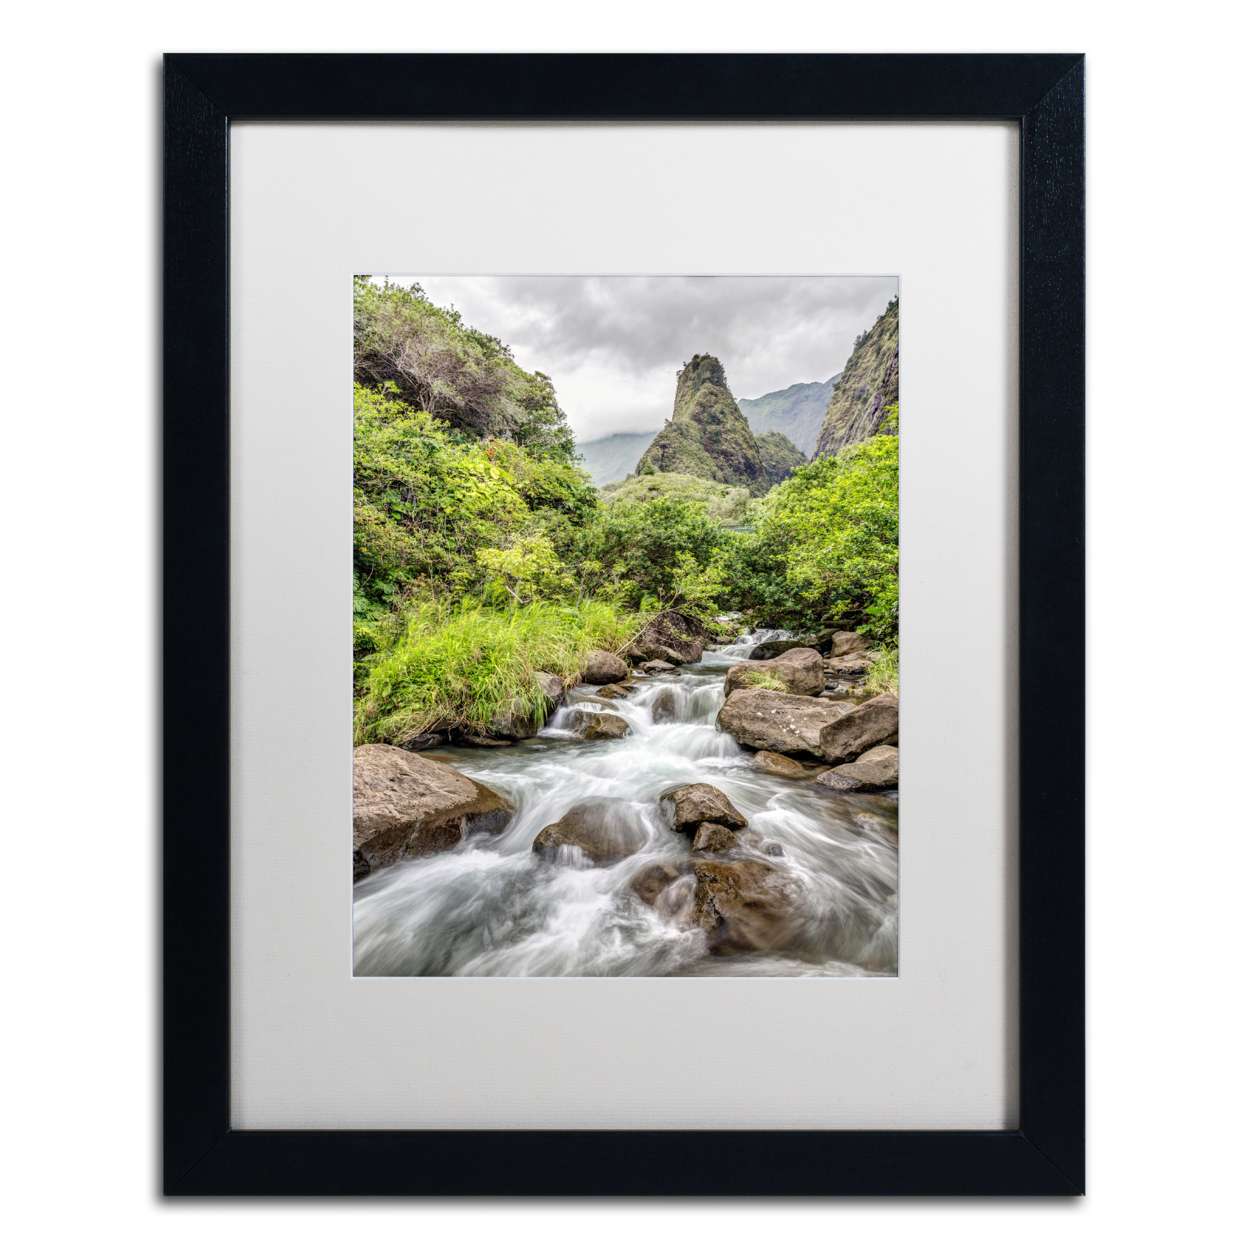 Pierre Leclerc 'Iao Valley Maui' Black Wooden Framed Art 18 X 22 Inches